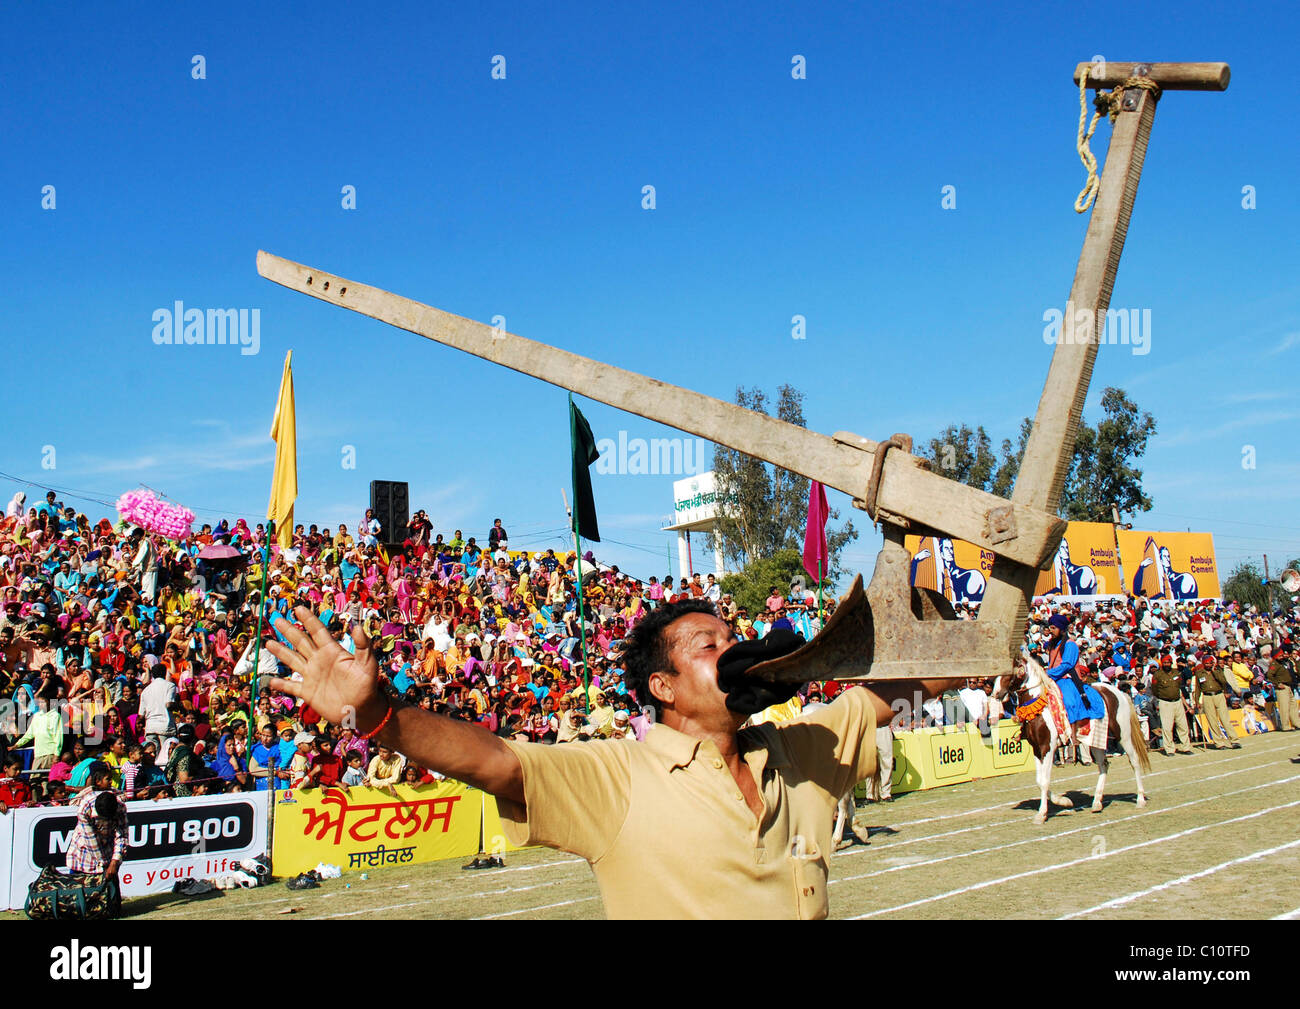 An Indian villager holds up a plough in his mouth as he displays his skills at the Kila Raipur Rural Olympics Ludhiana, India - Stock Photo